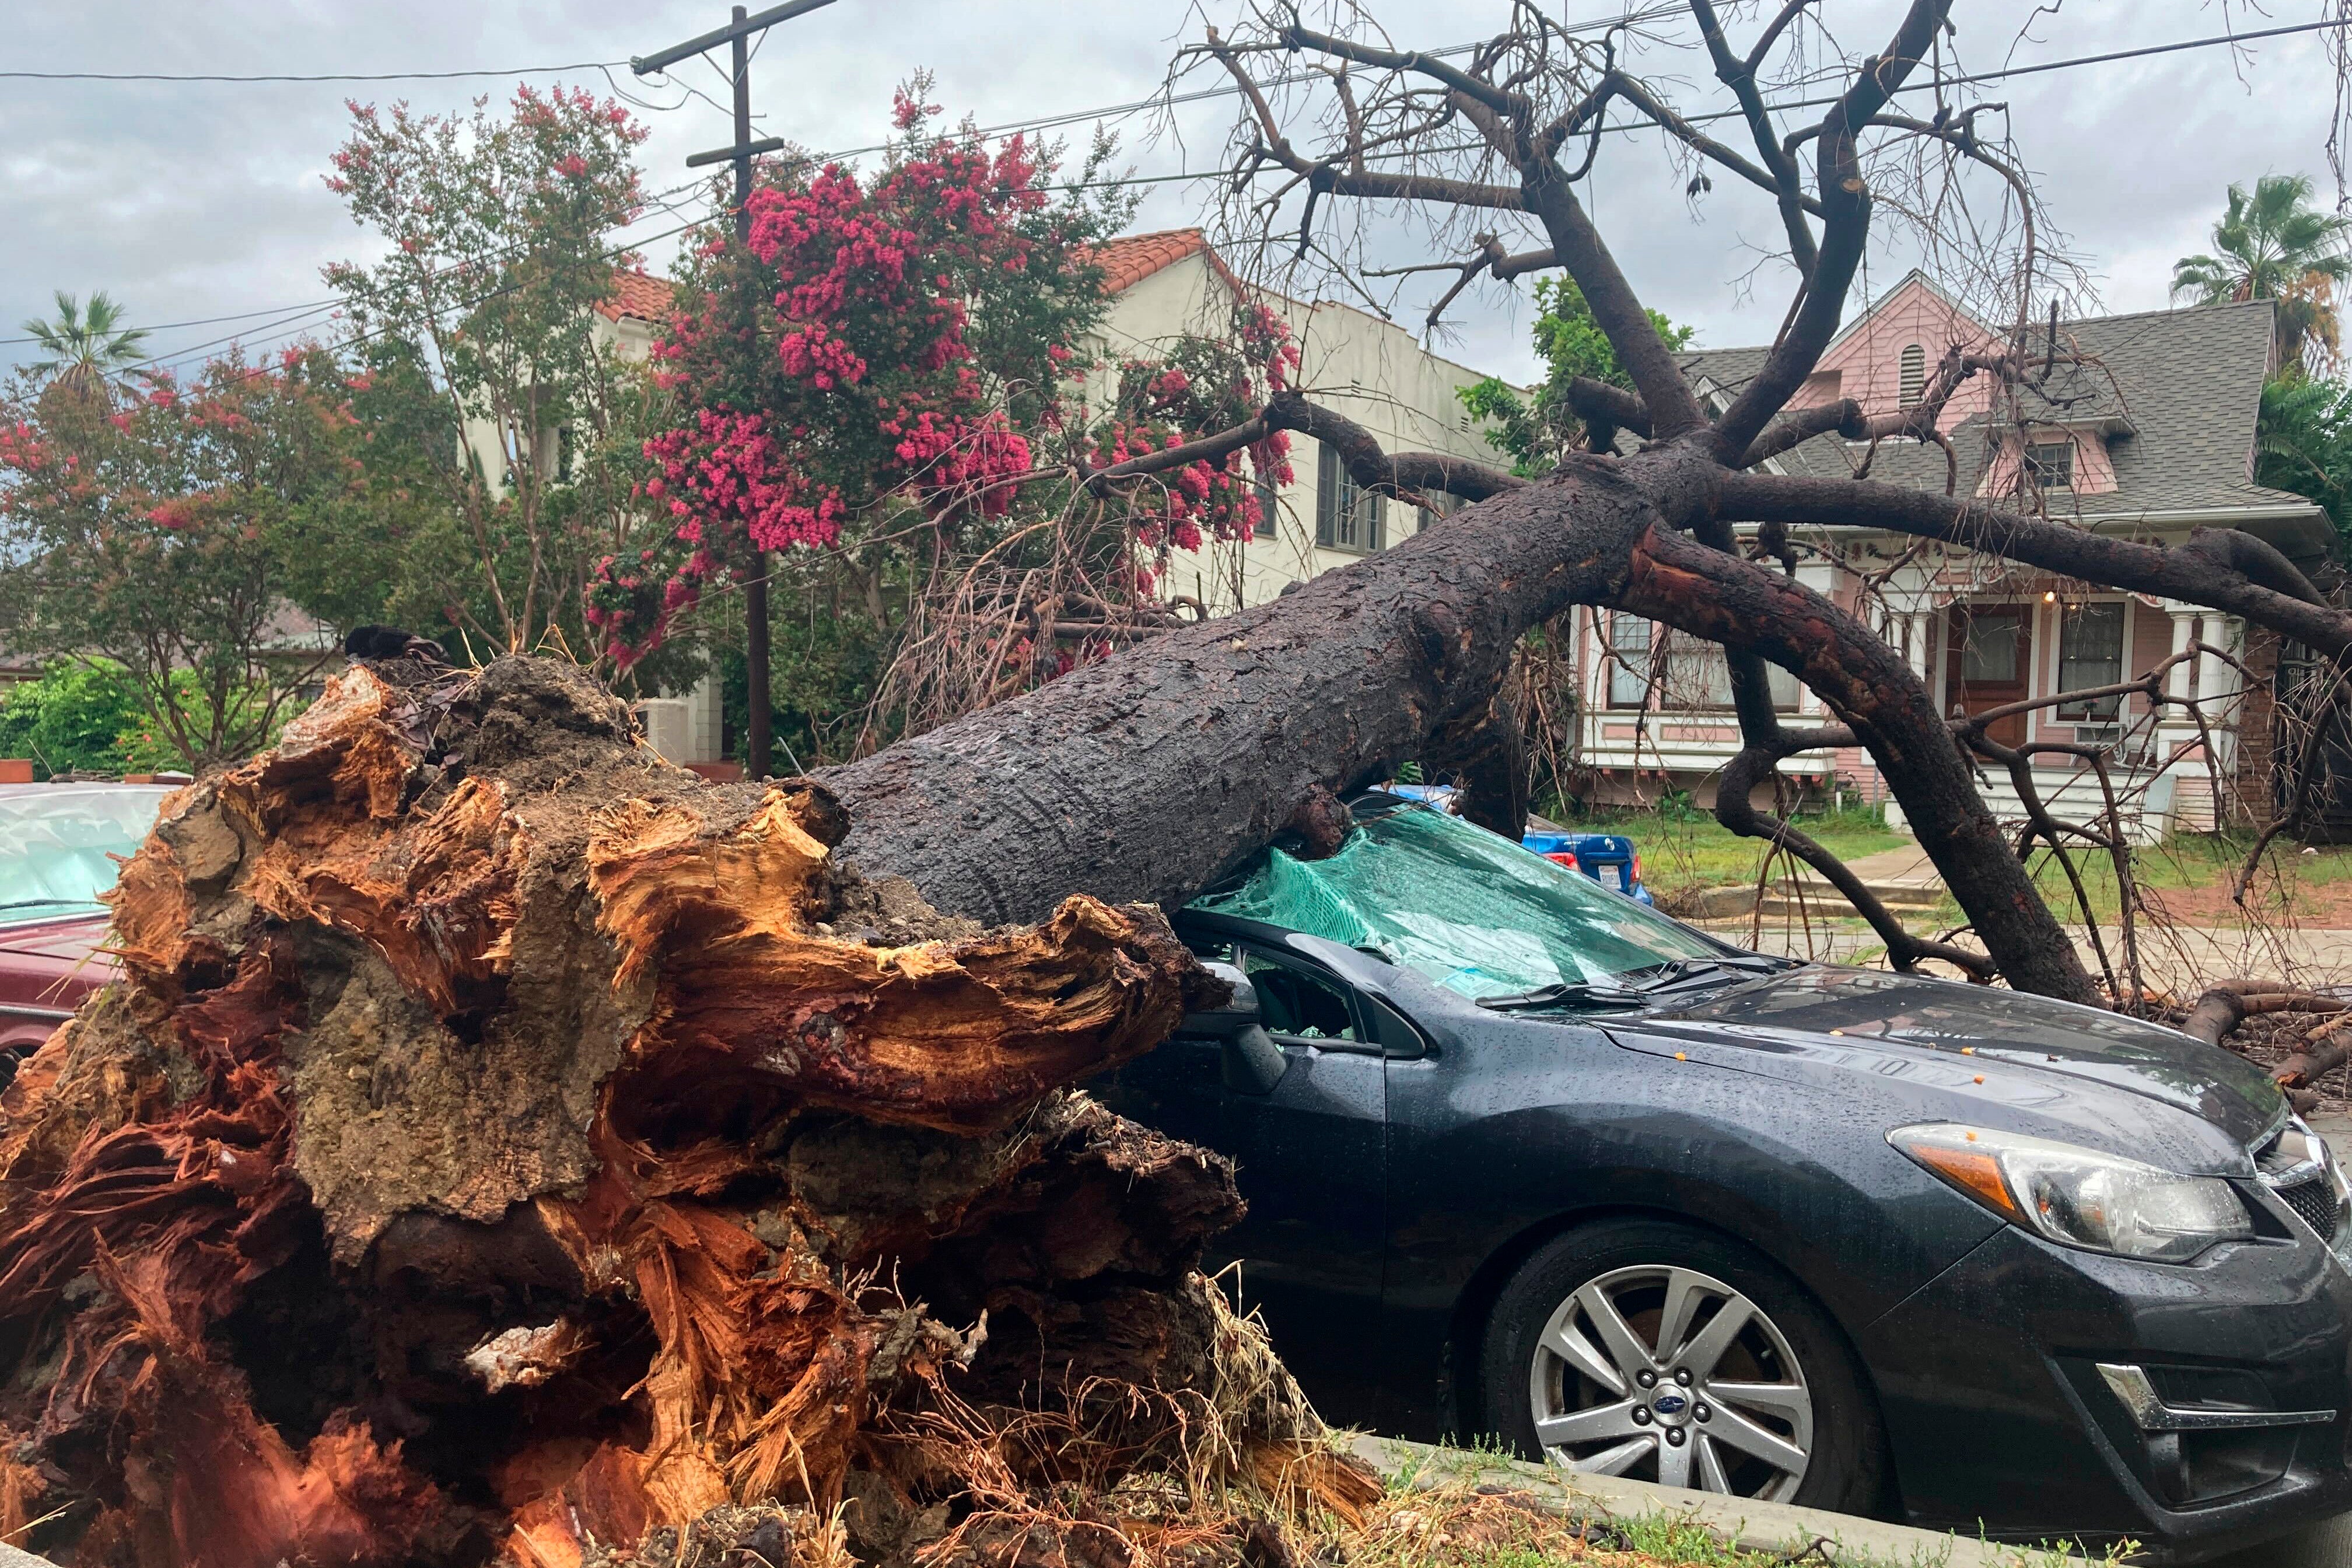 A toppled tree from the tropical storm covers a car in Los Angeles on Monday after Storm Hilary barreled through